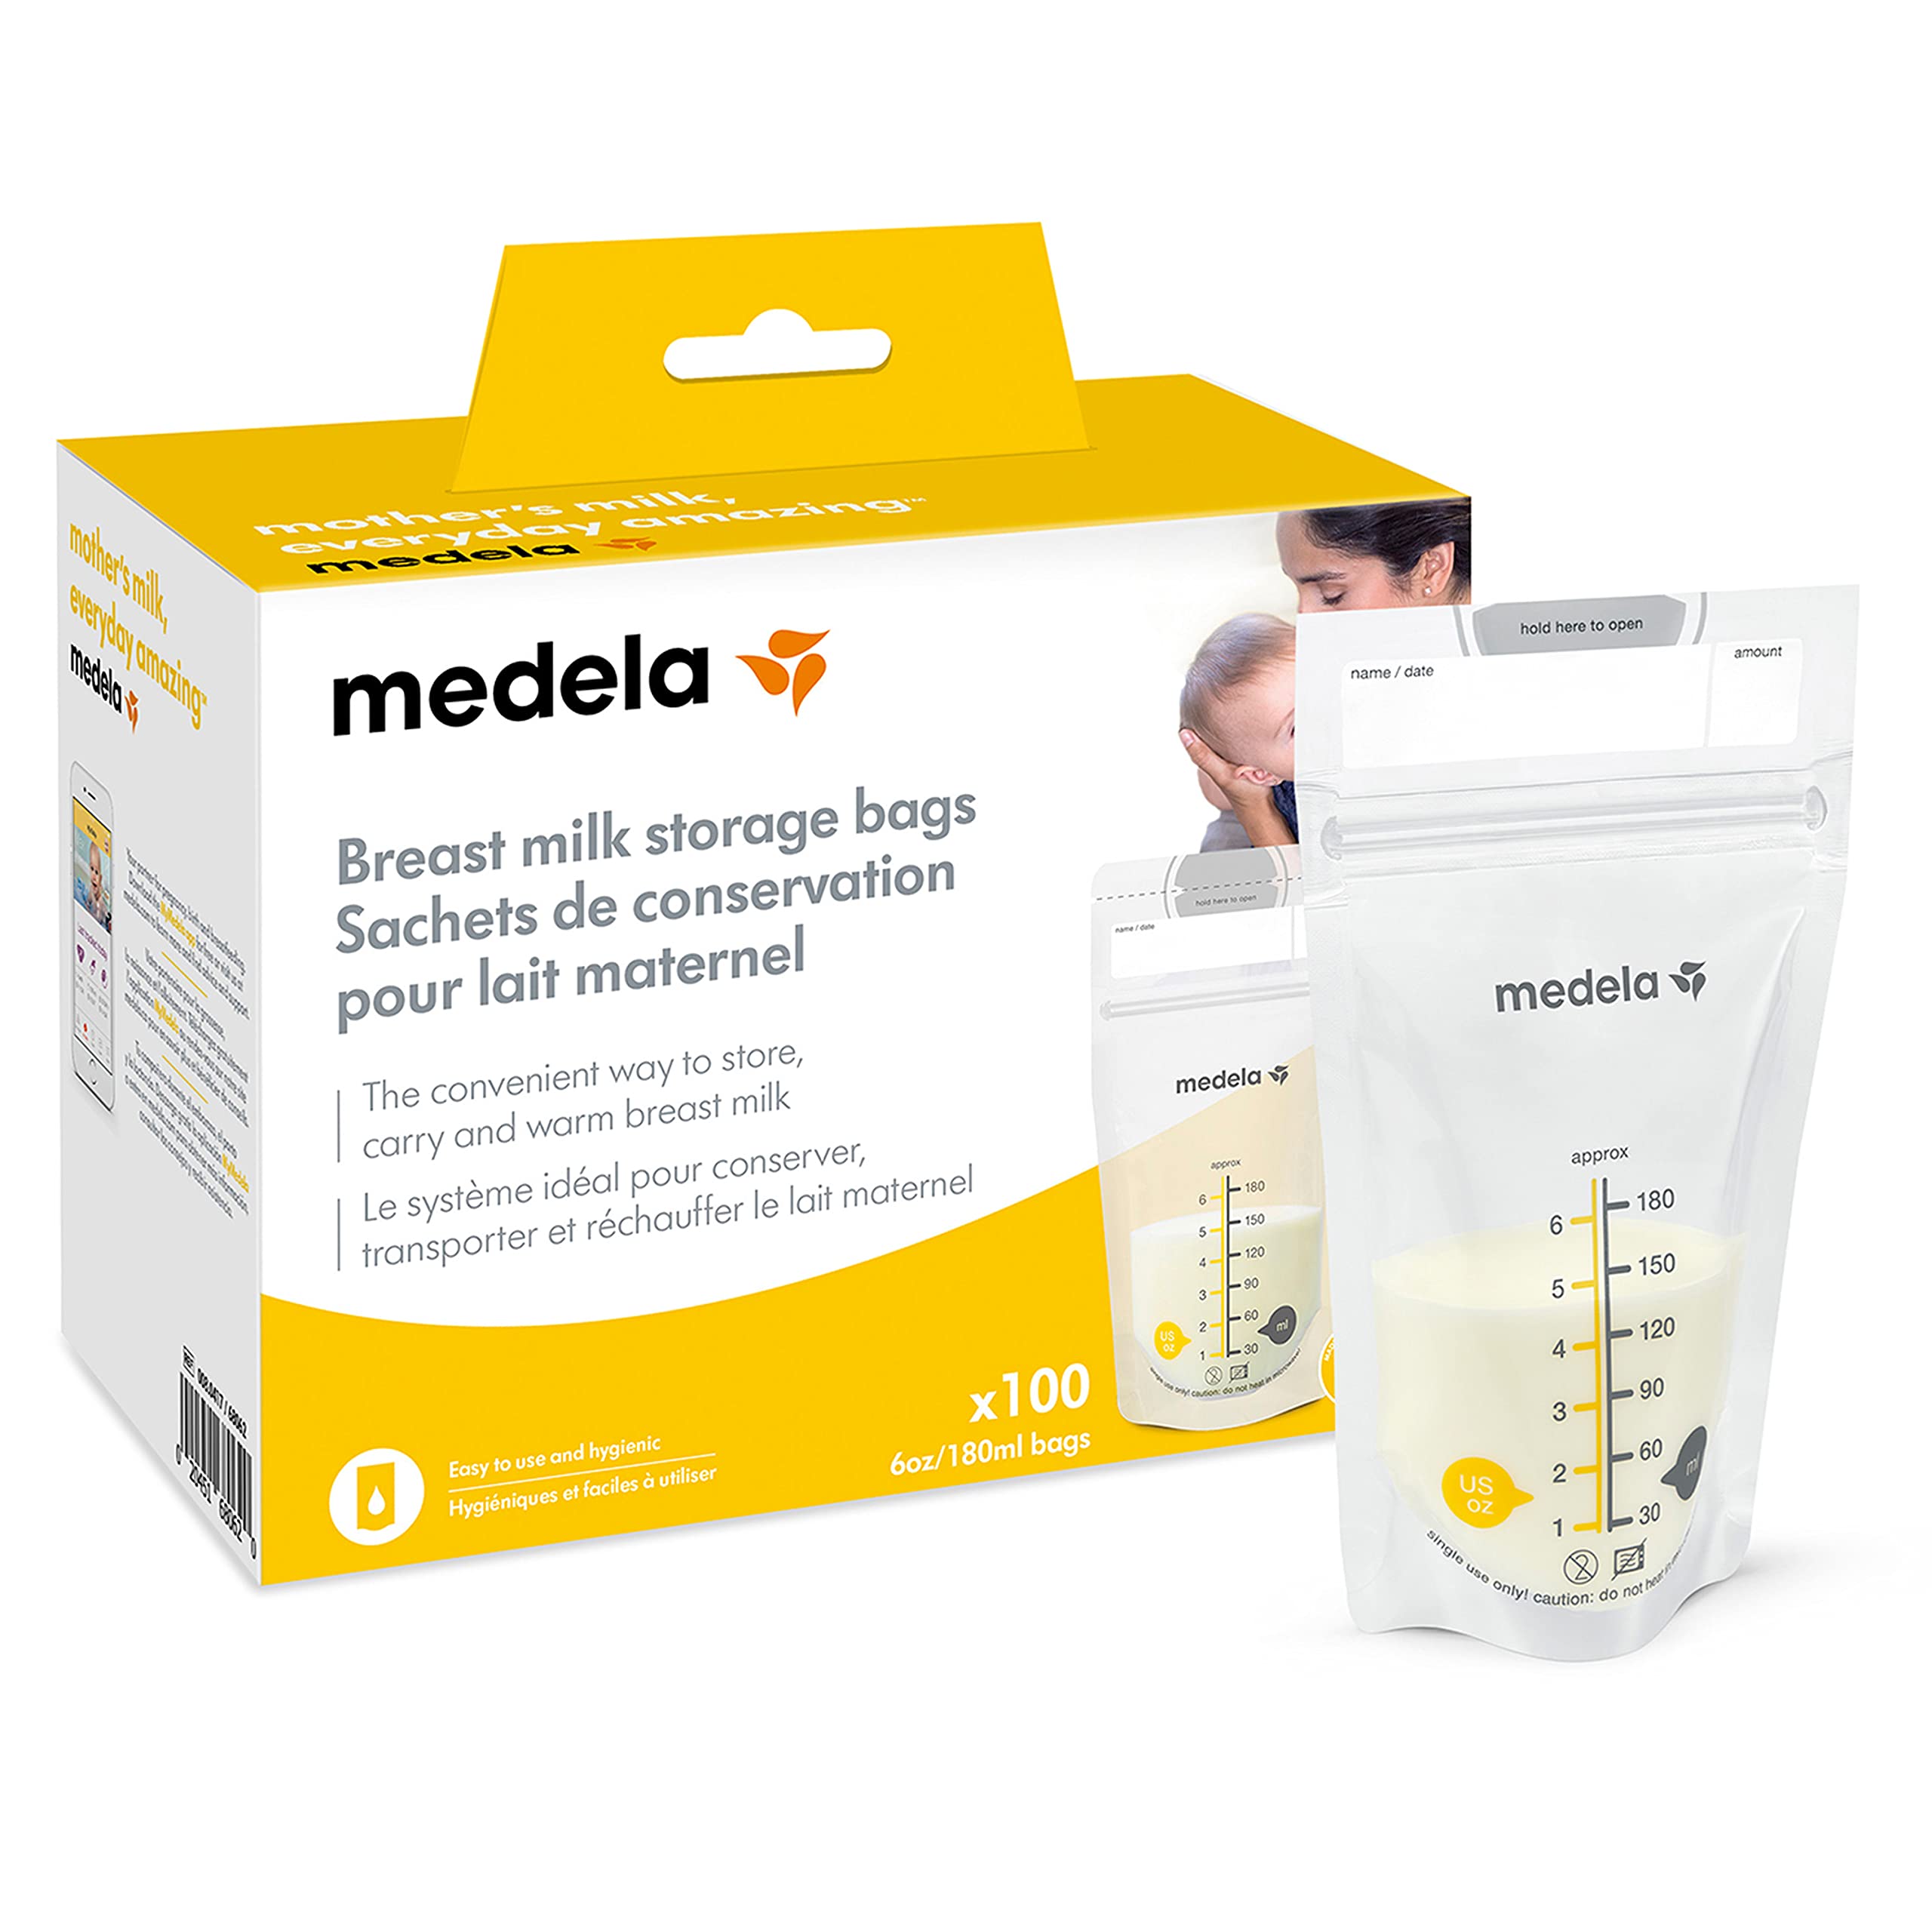 Medela Breast Milk Storage Bags, 100 Count, Ready to Use